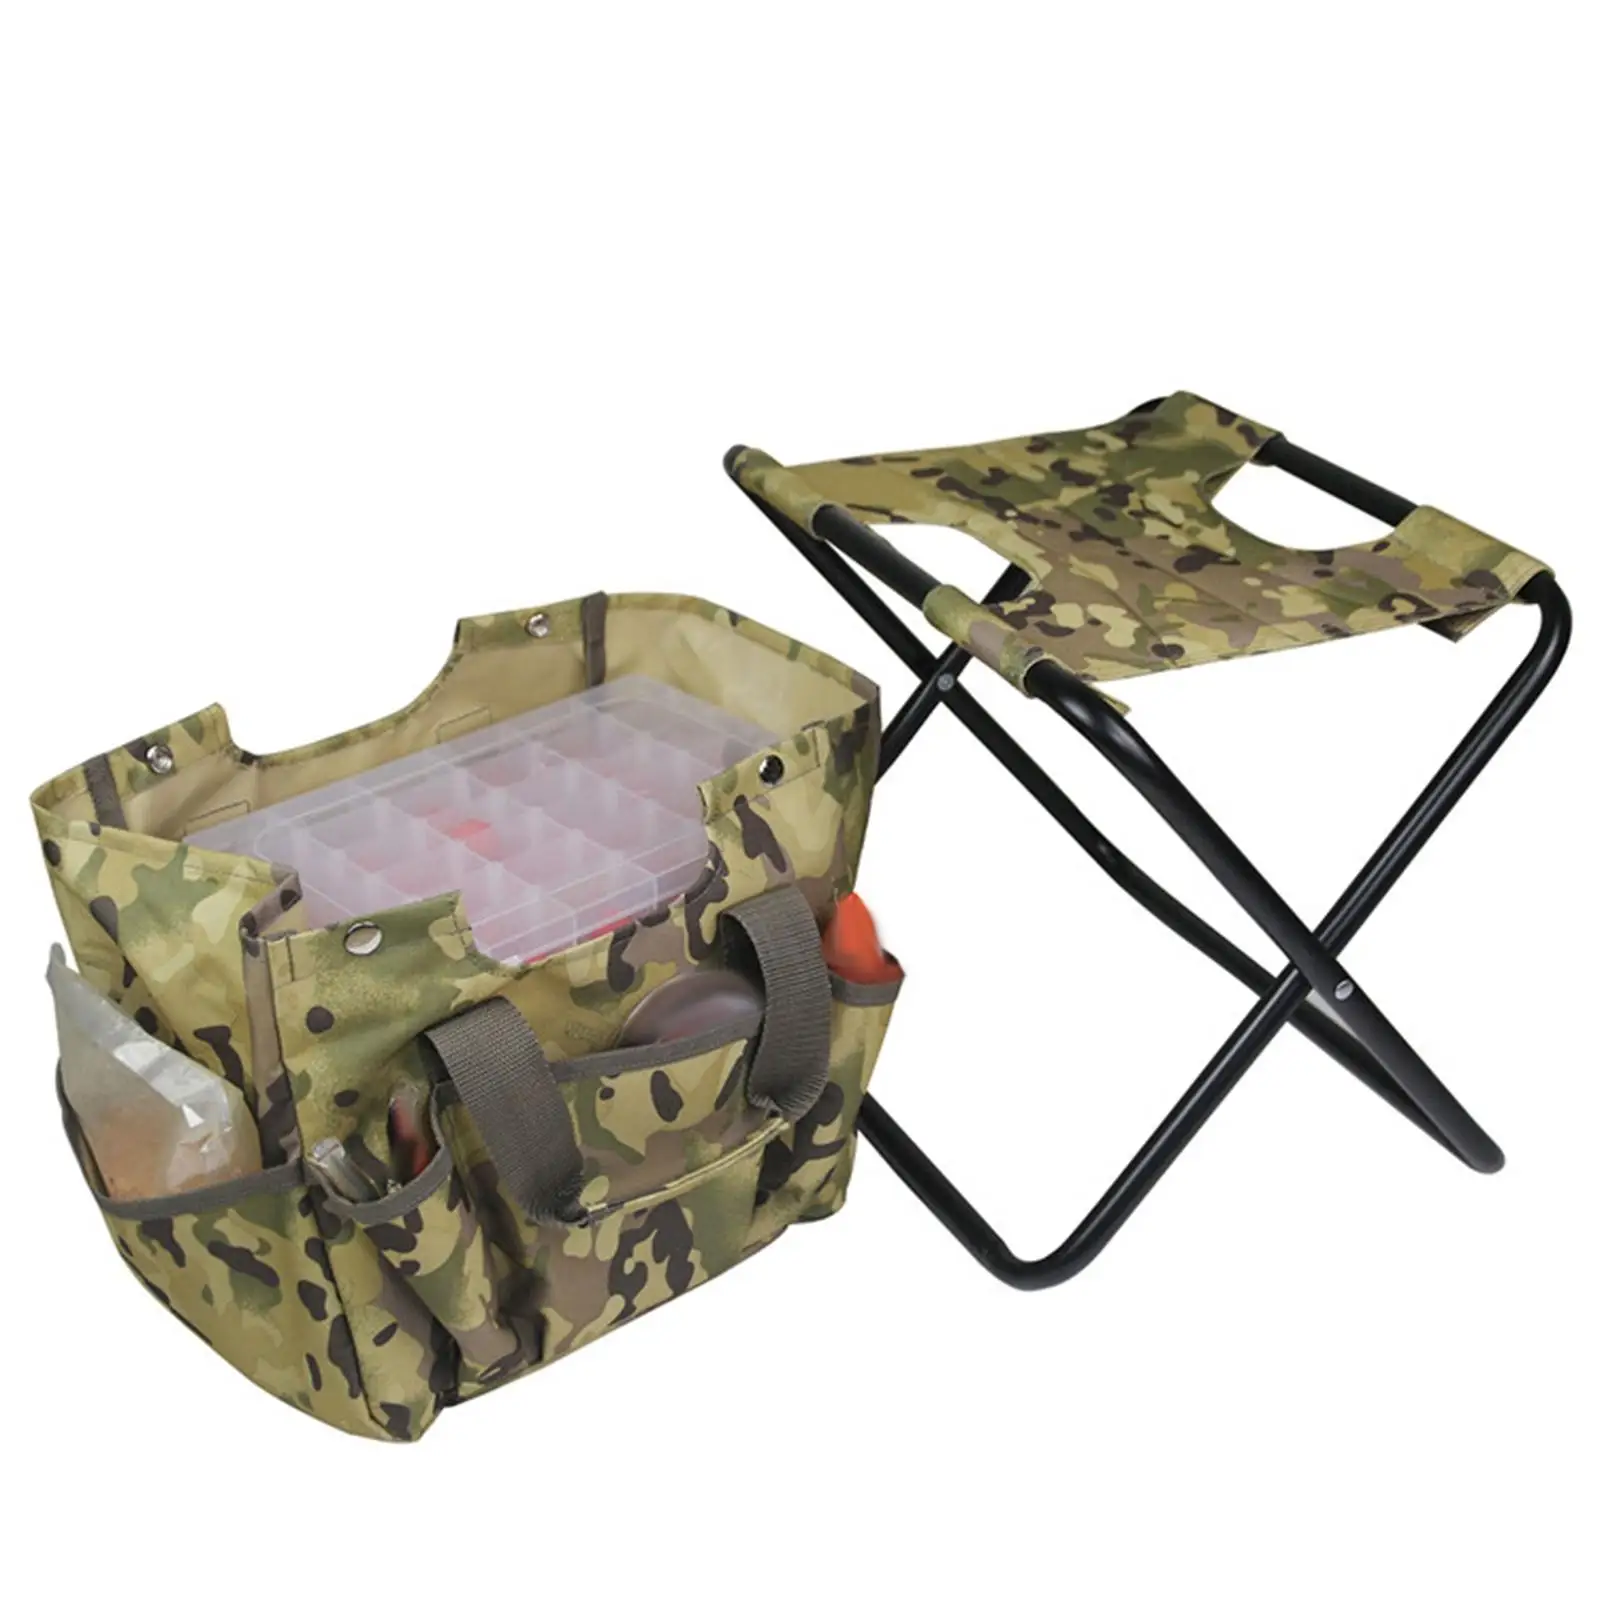 Camping Chair with Handbag Furniture Ultralight Folding Stool for BBQ